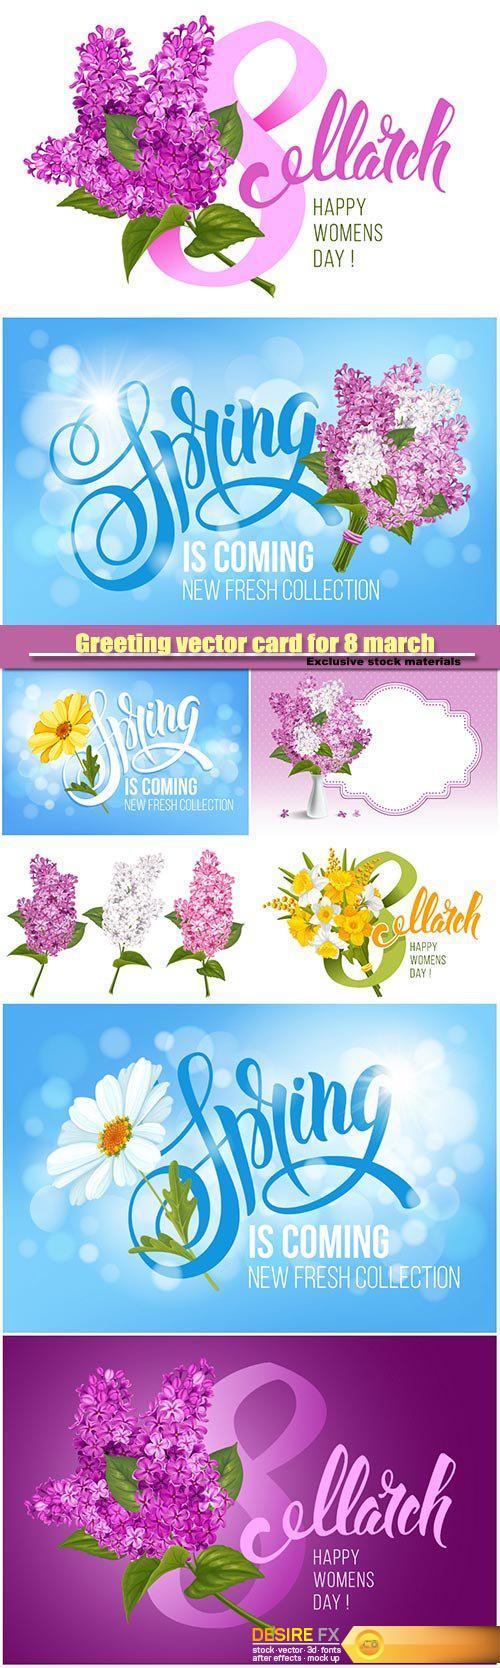 Greeting vector card for 8 march, womens day